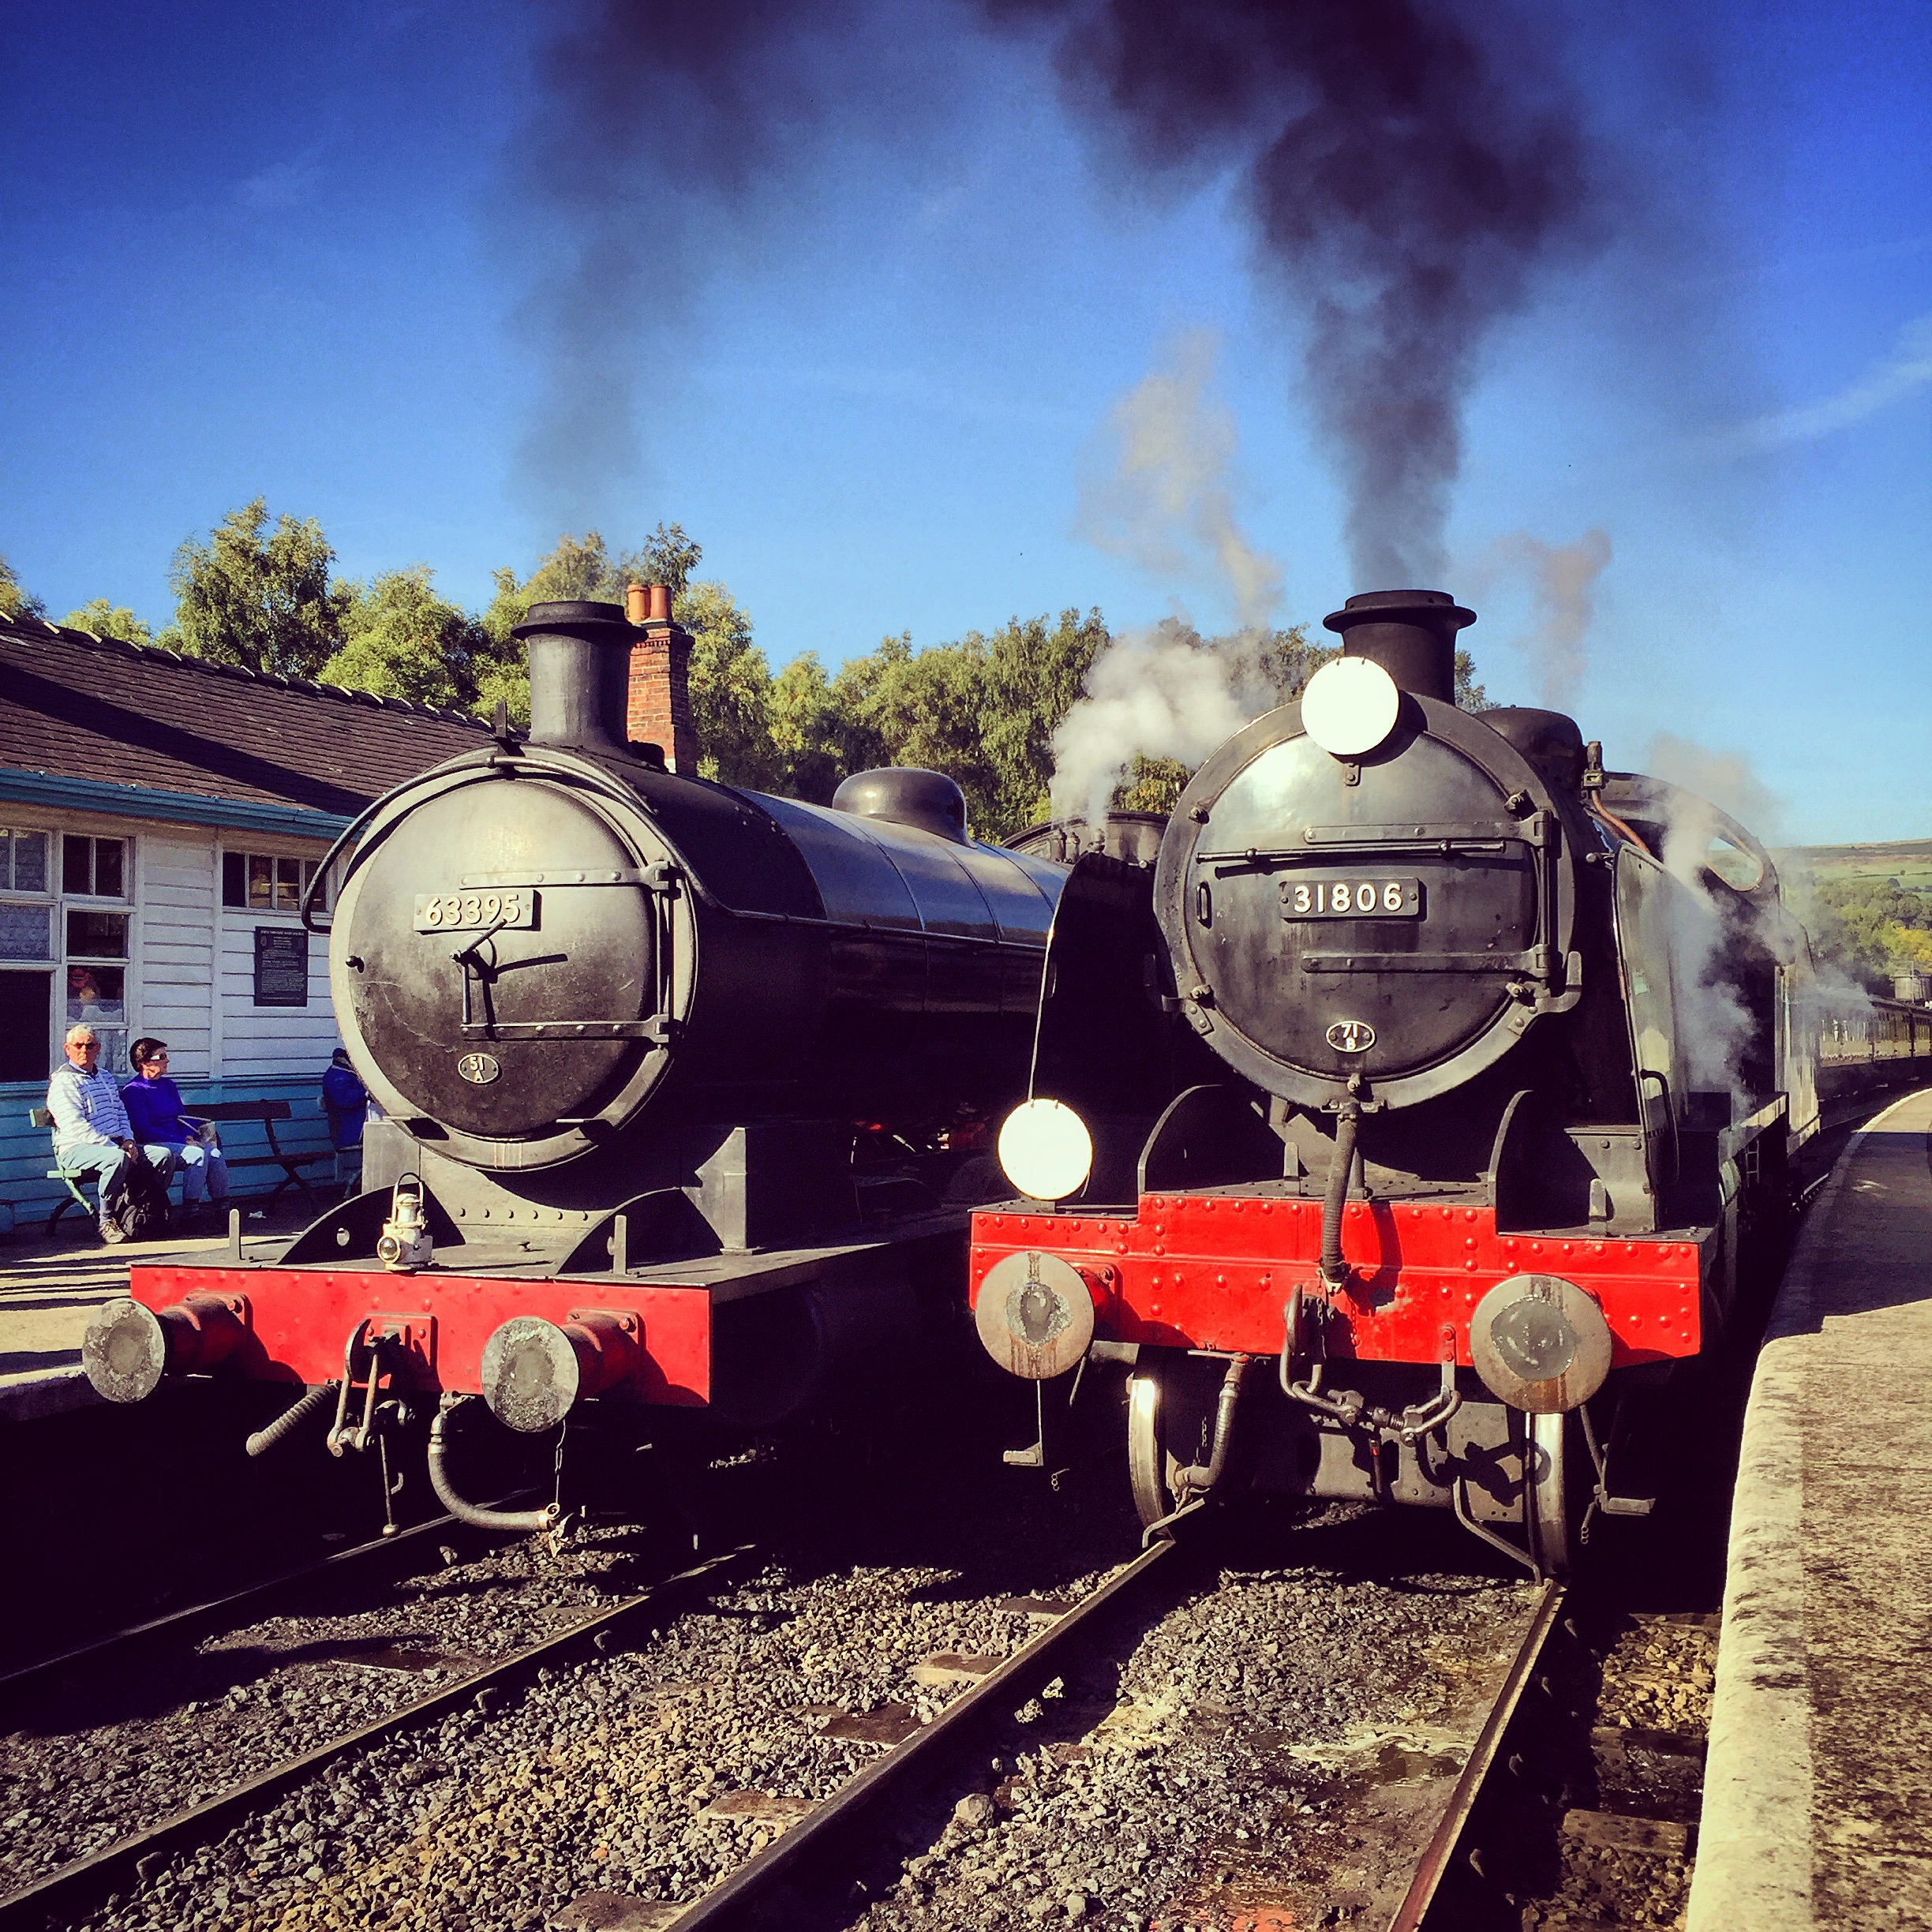 63395 and 31806 at Grosmont.